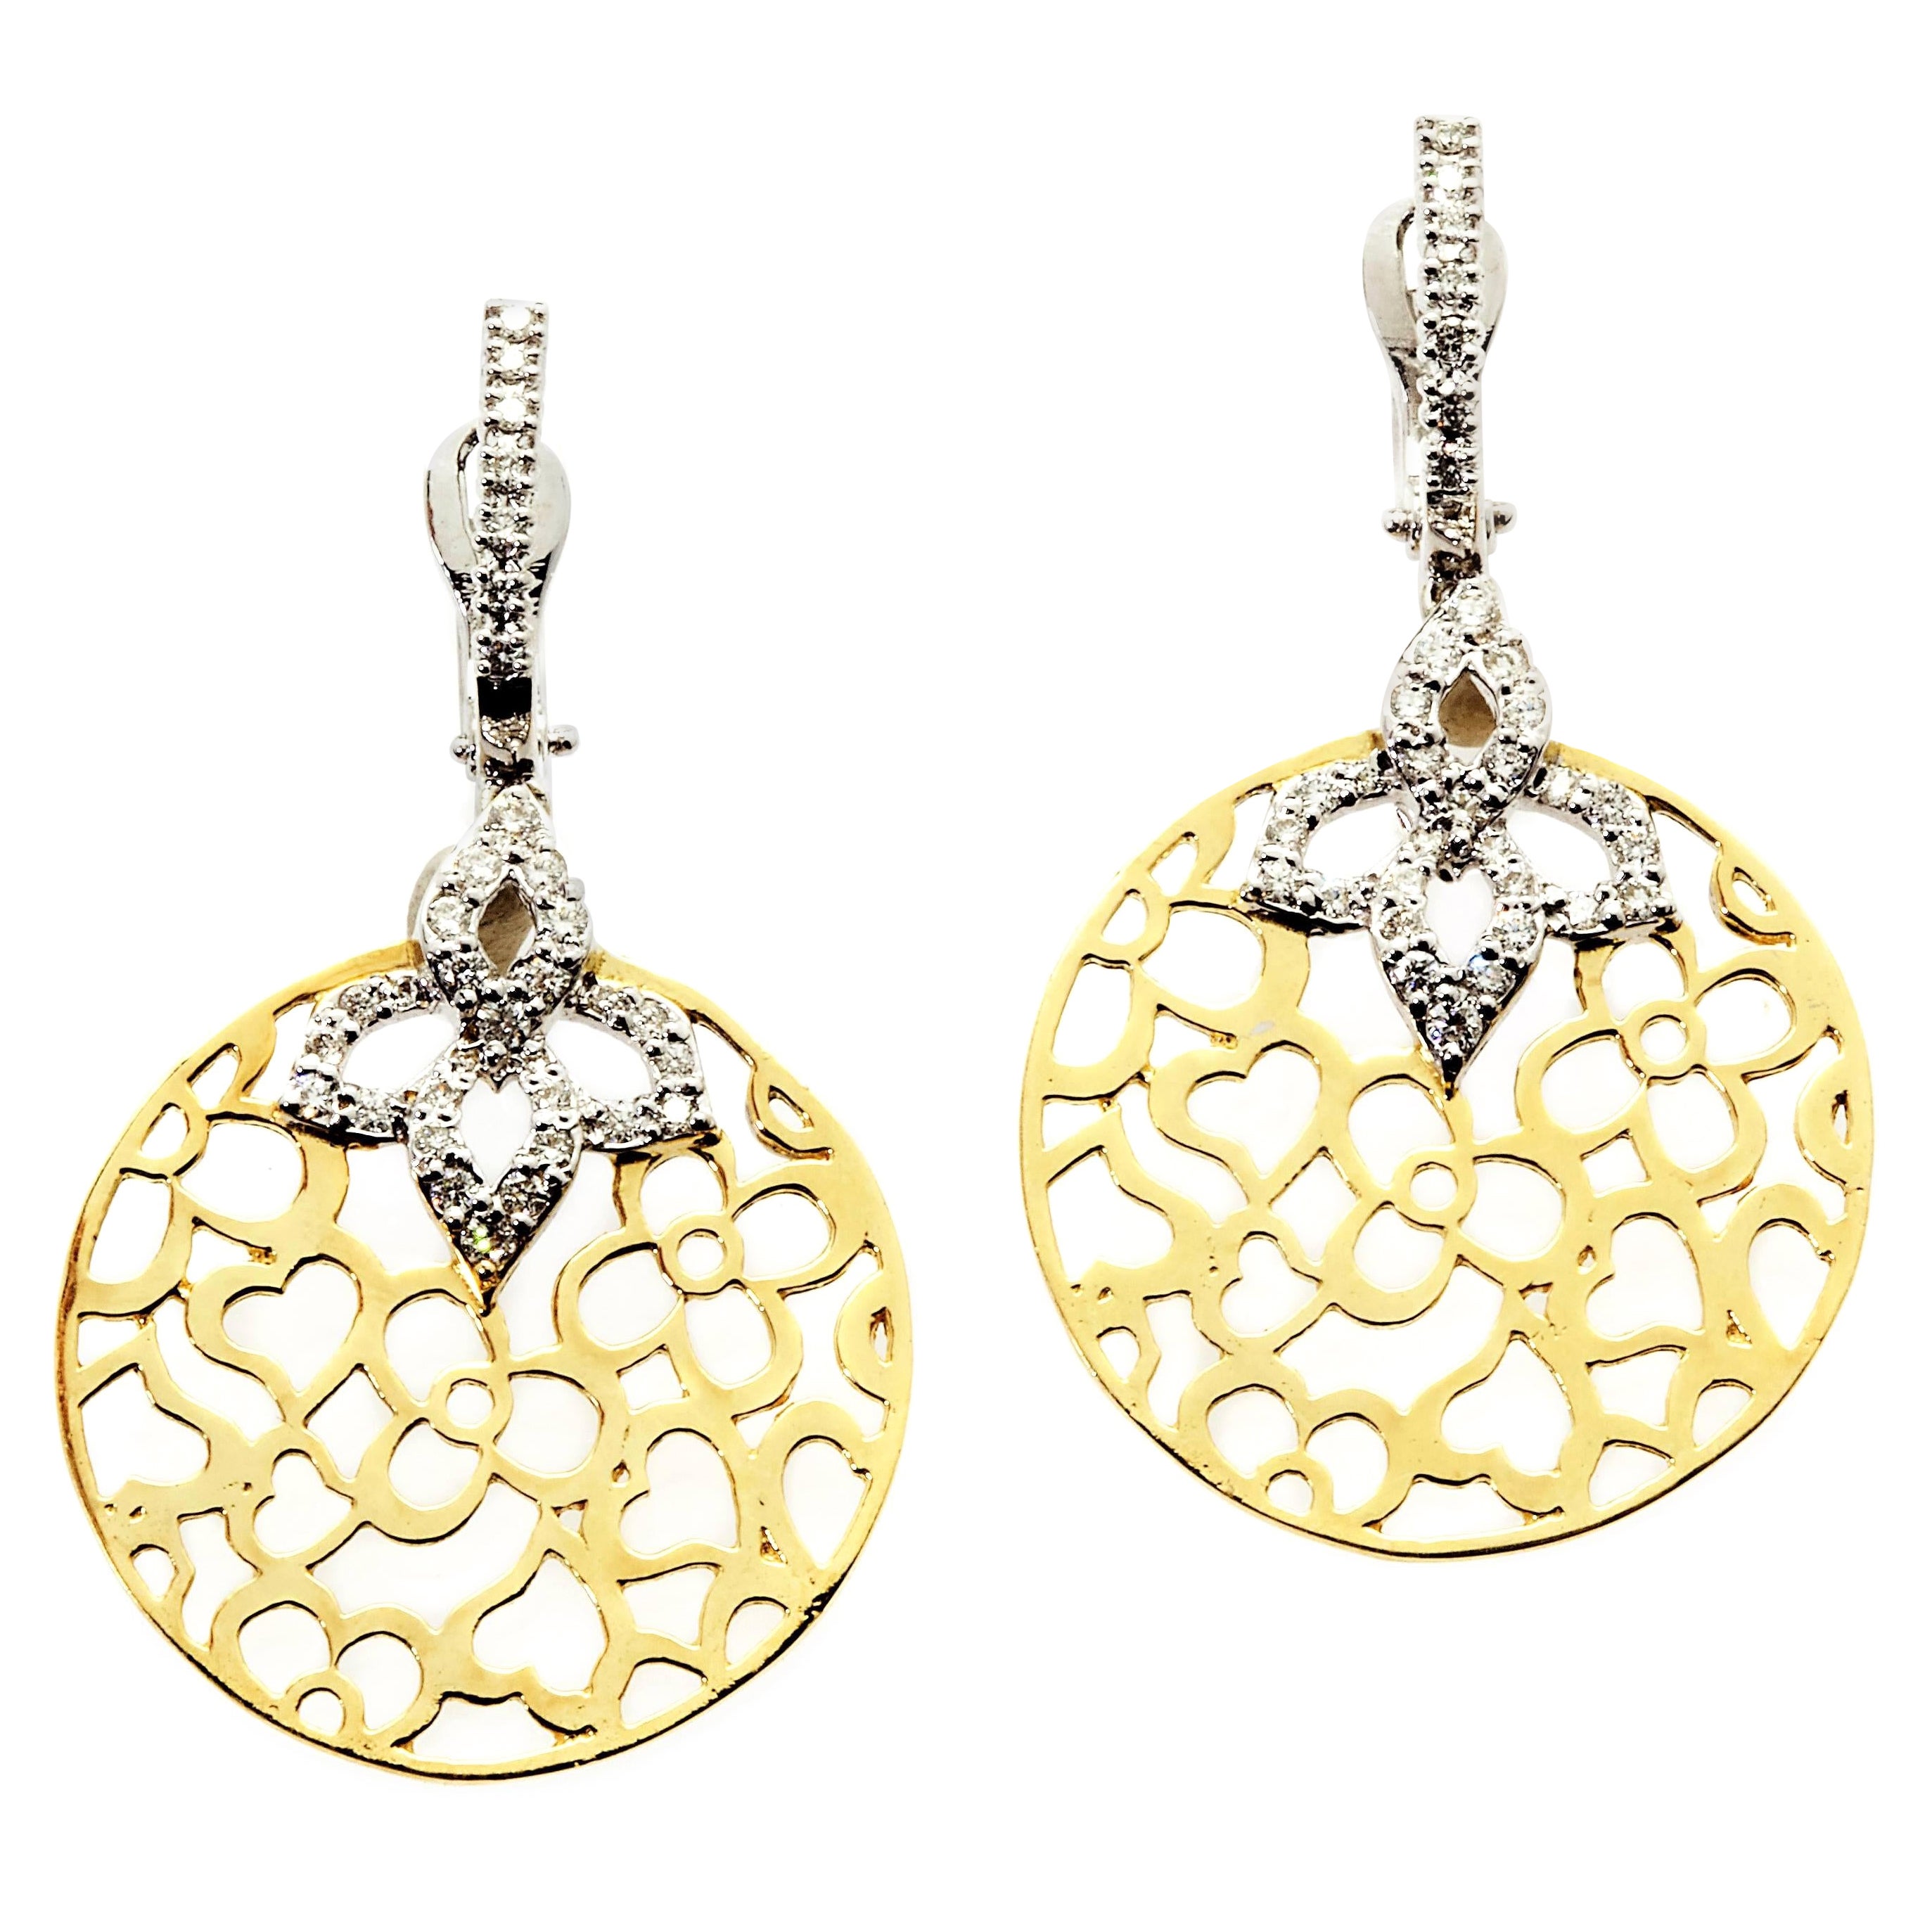 Stambolian 18k Yellow White Two-Tone Gold and Diamond Floral Drop Earrings For Sale